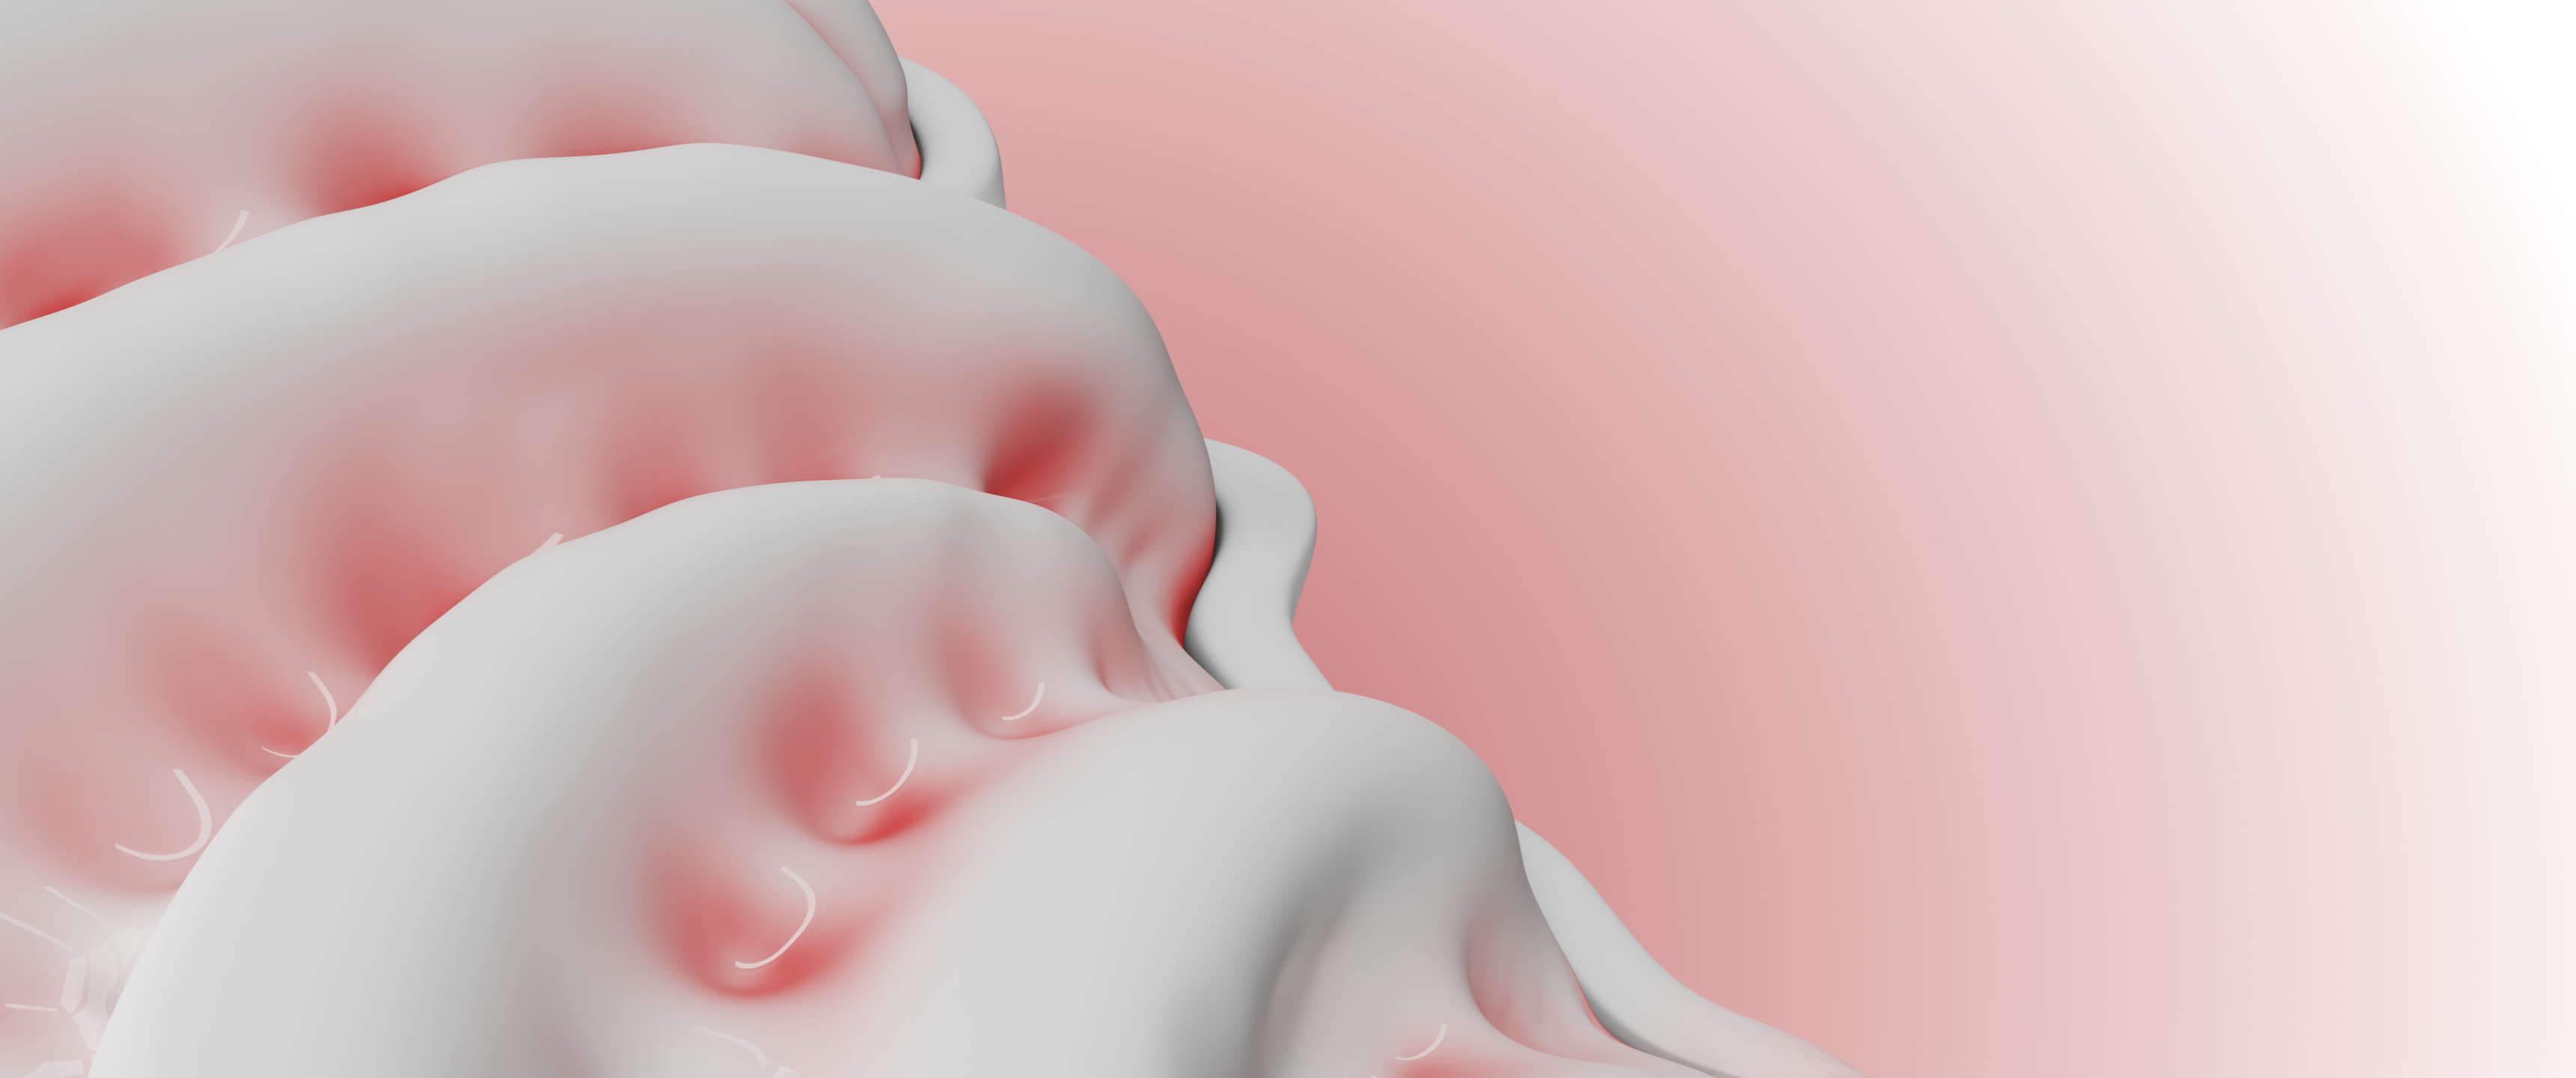 General 3440x1440 abstract 3D Abstract organic pink glossy ultrawide digital art simple background